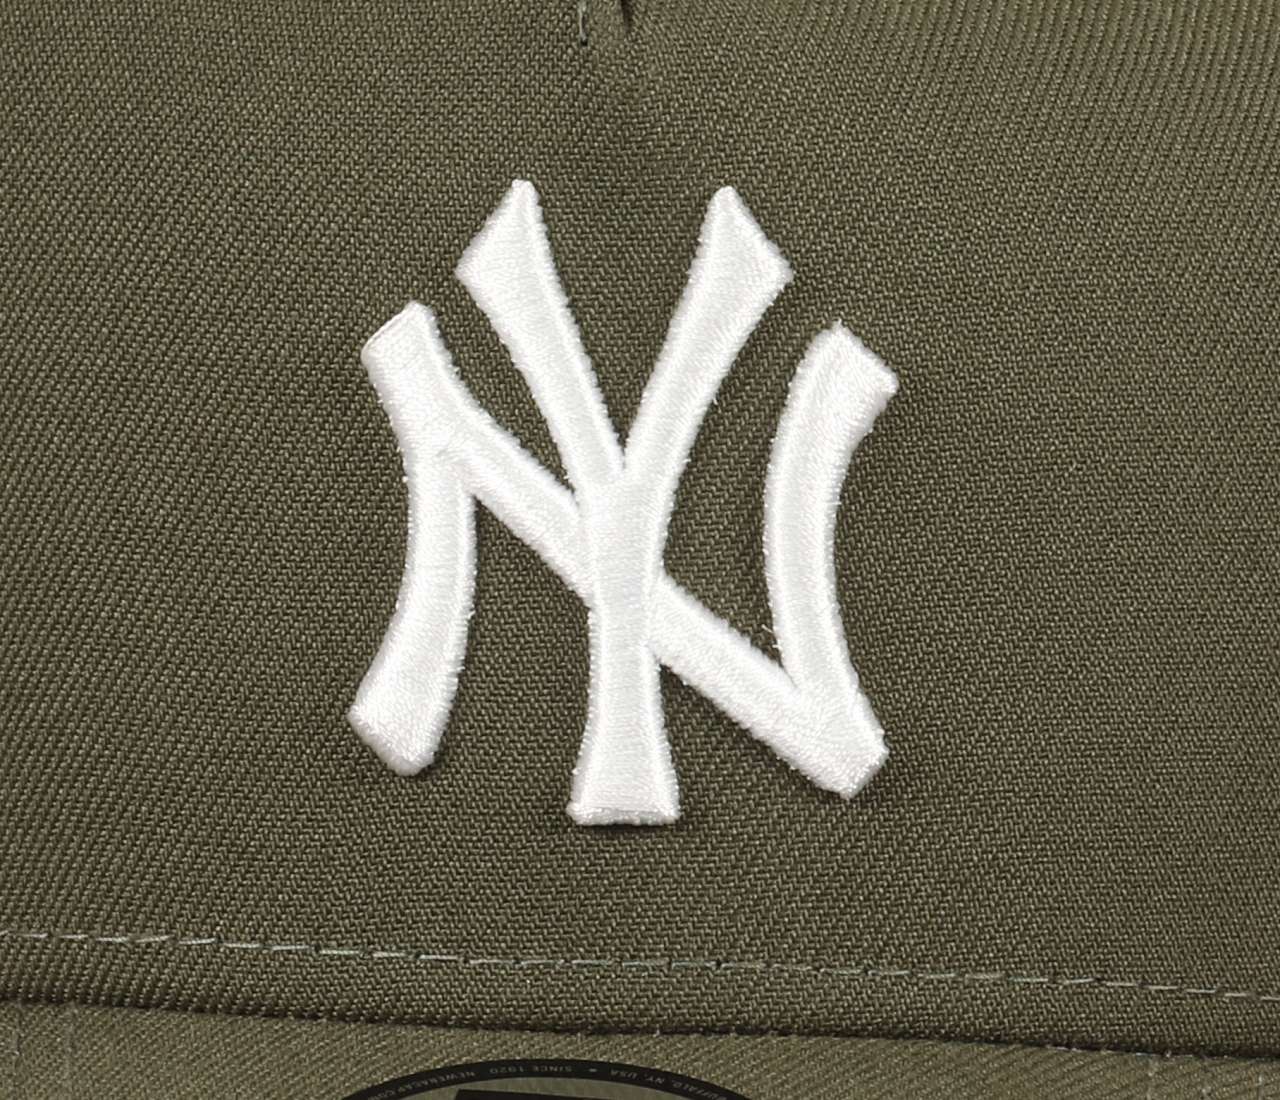 New York Yankees MLB World Series 1996 Sidepatch Cooperstown New Olive Forty A-Frame Snapback Cap New Era